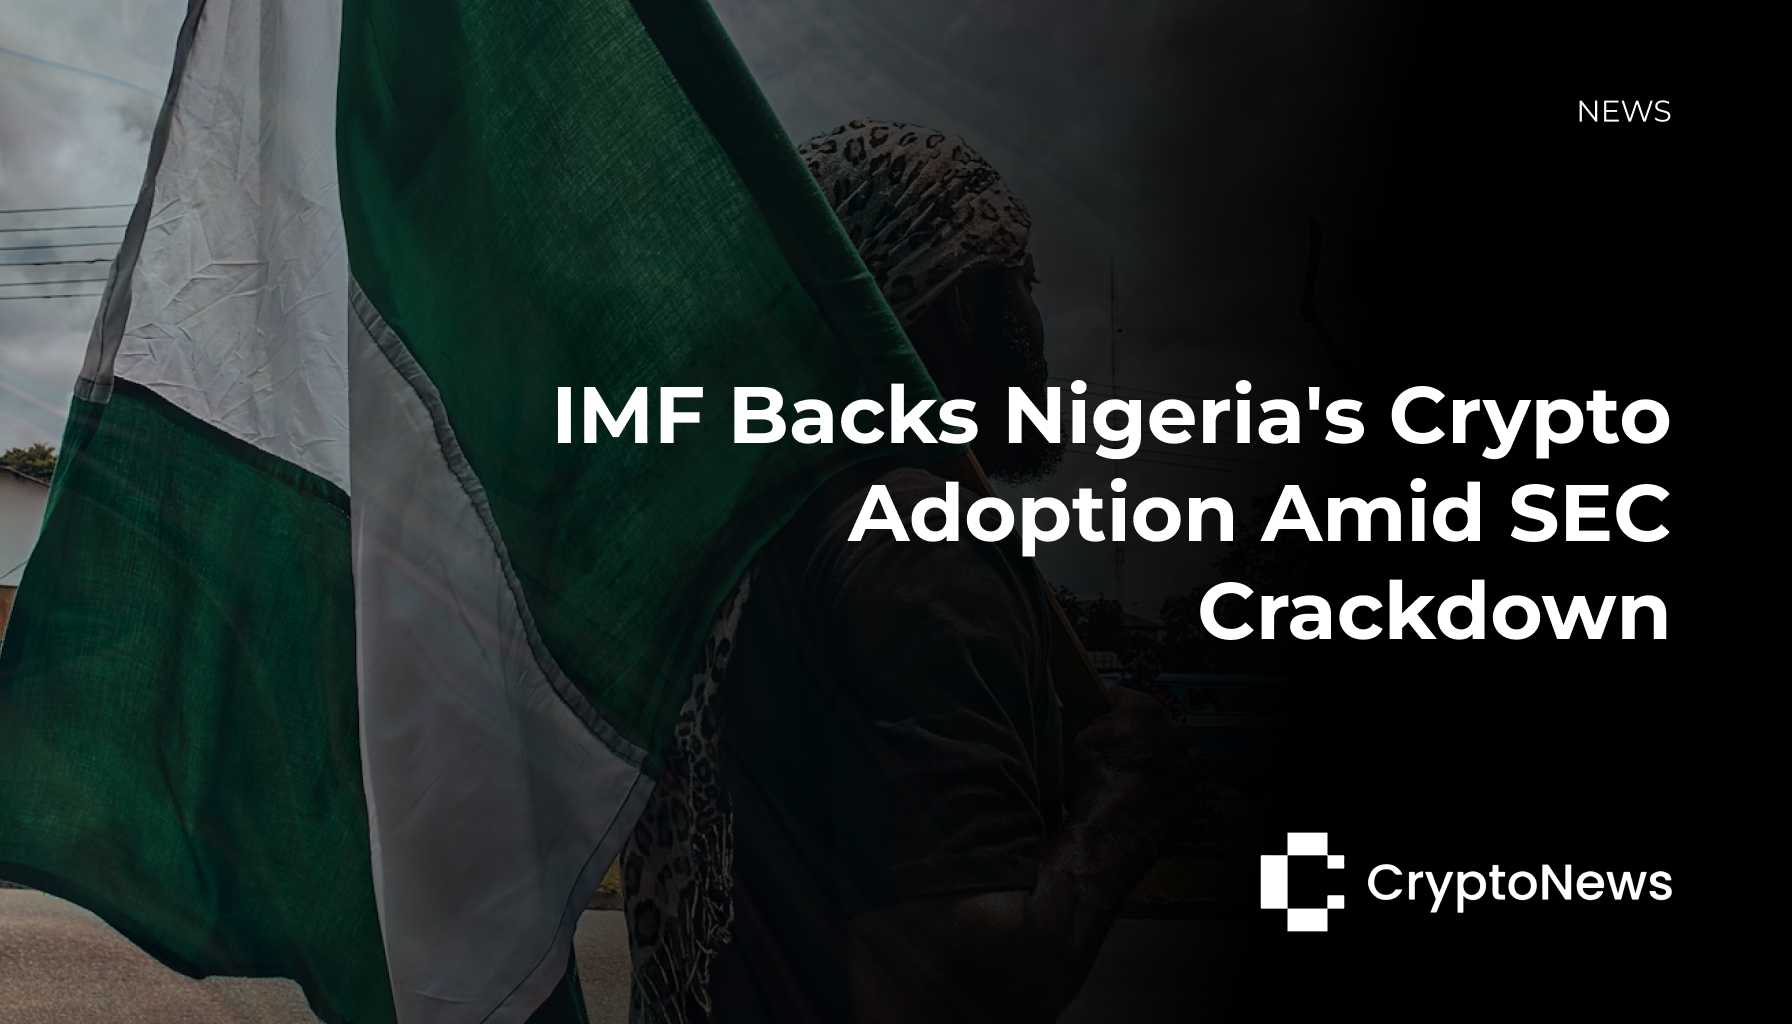 Person holding the Nigerian flag with text overlay: "IMF Backs Nigeria's Crypto Adoption Amid SEC Crackdown"